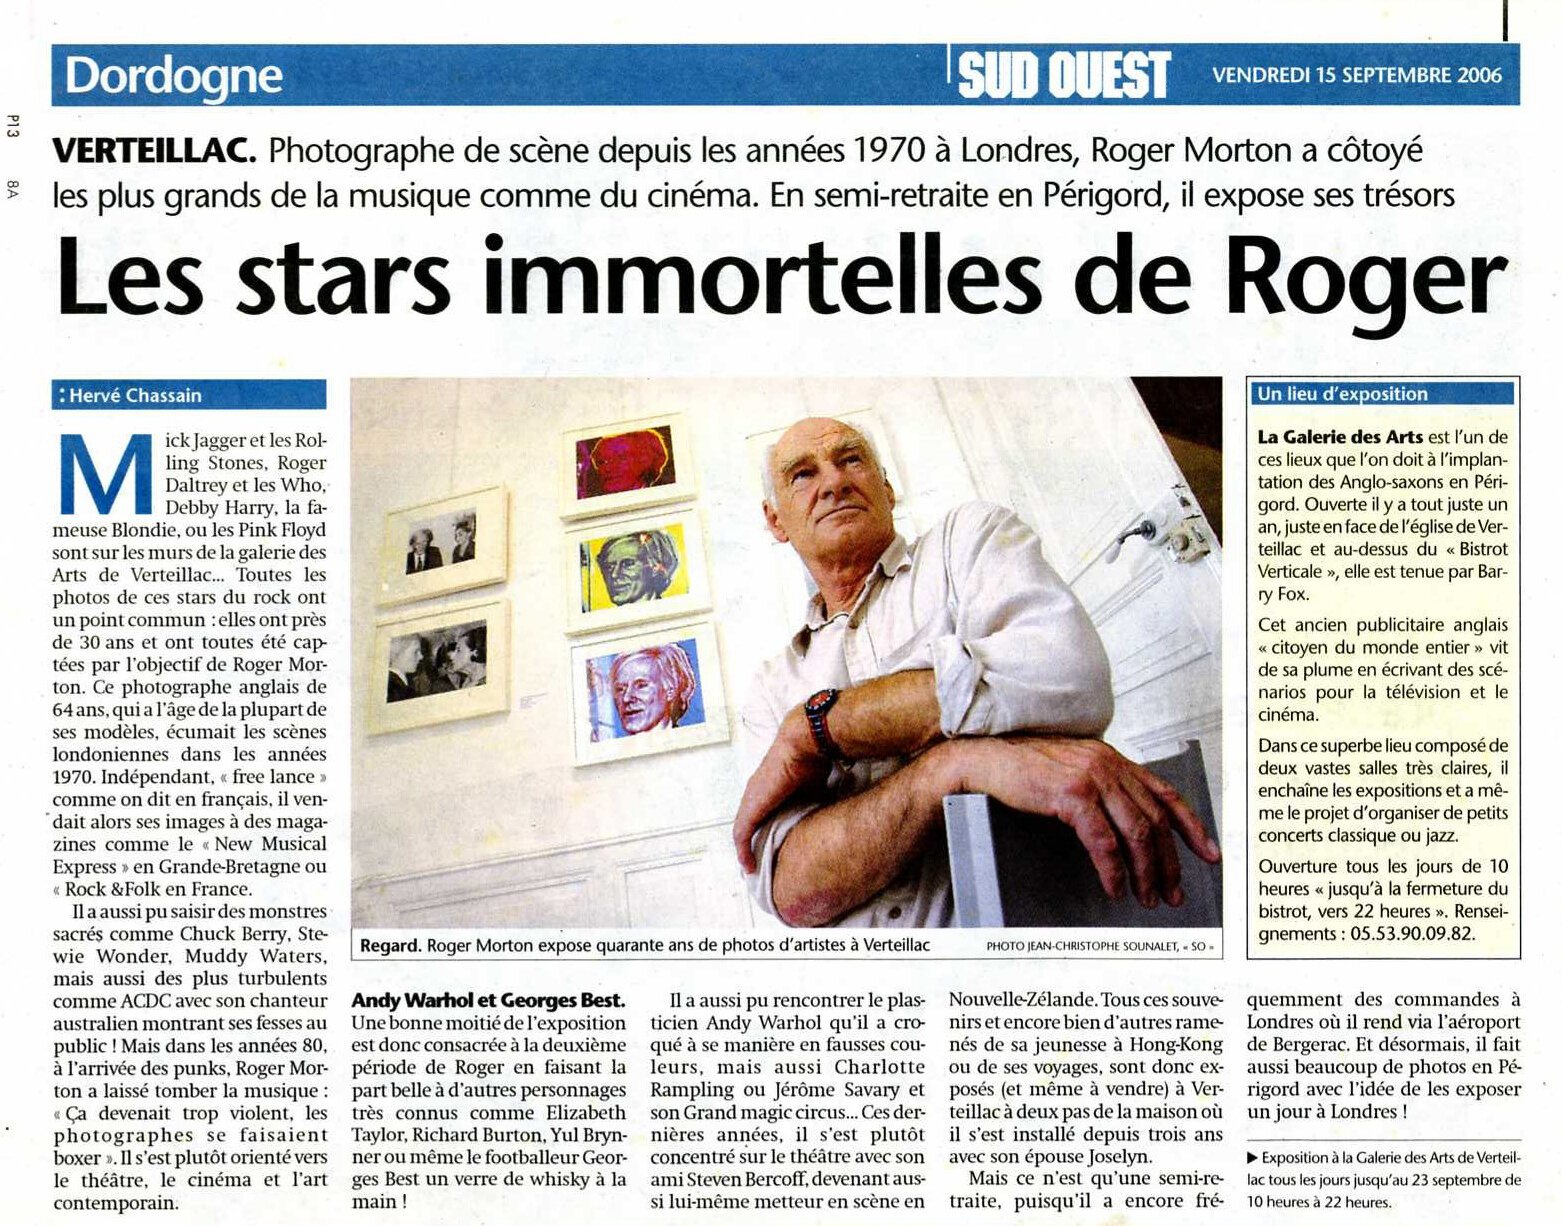 Story about Roger Morton's solo exhibion.